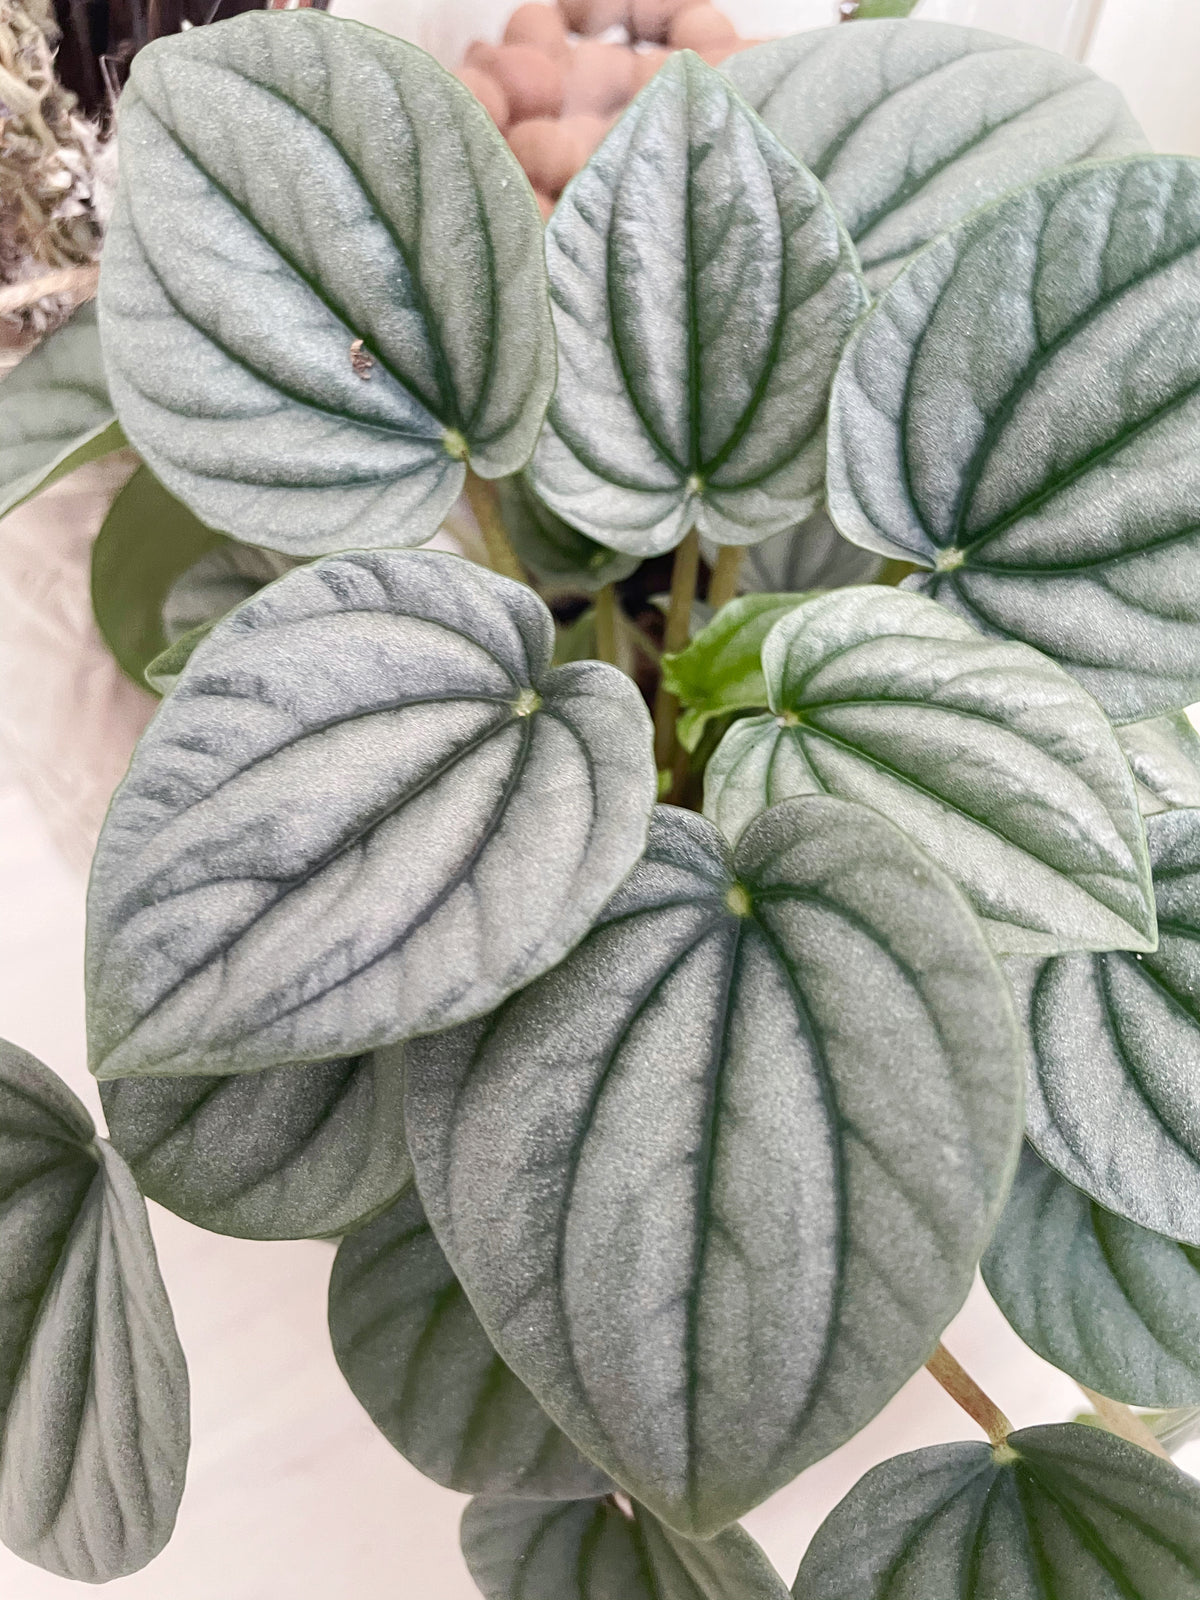 Frost peperomia